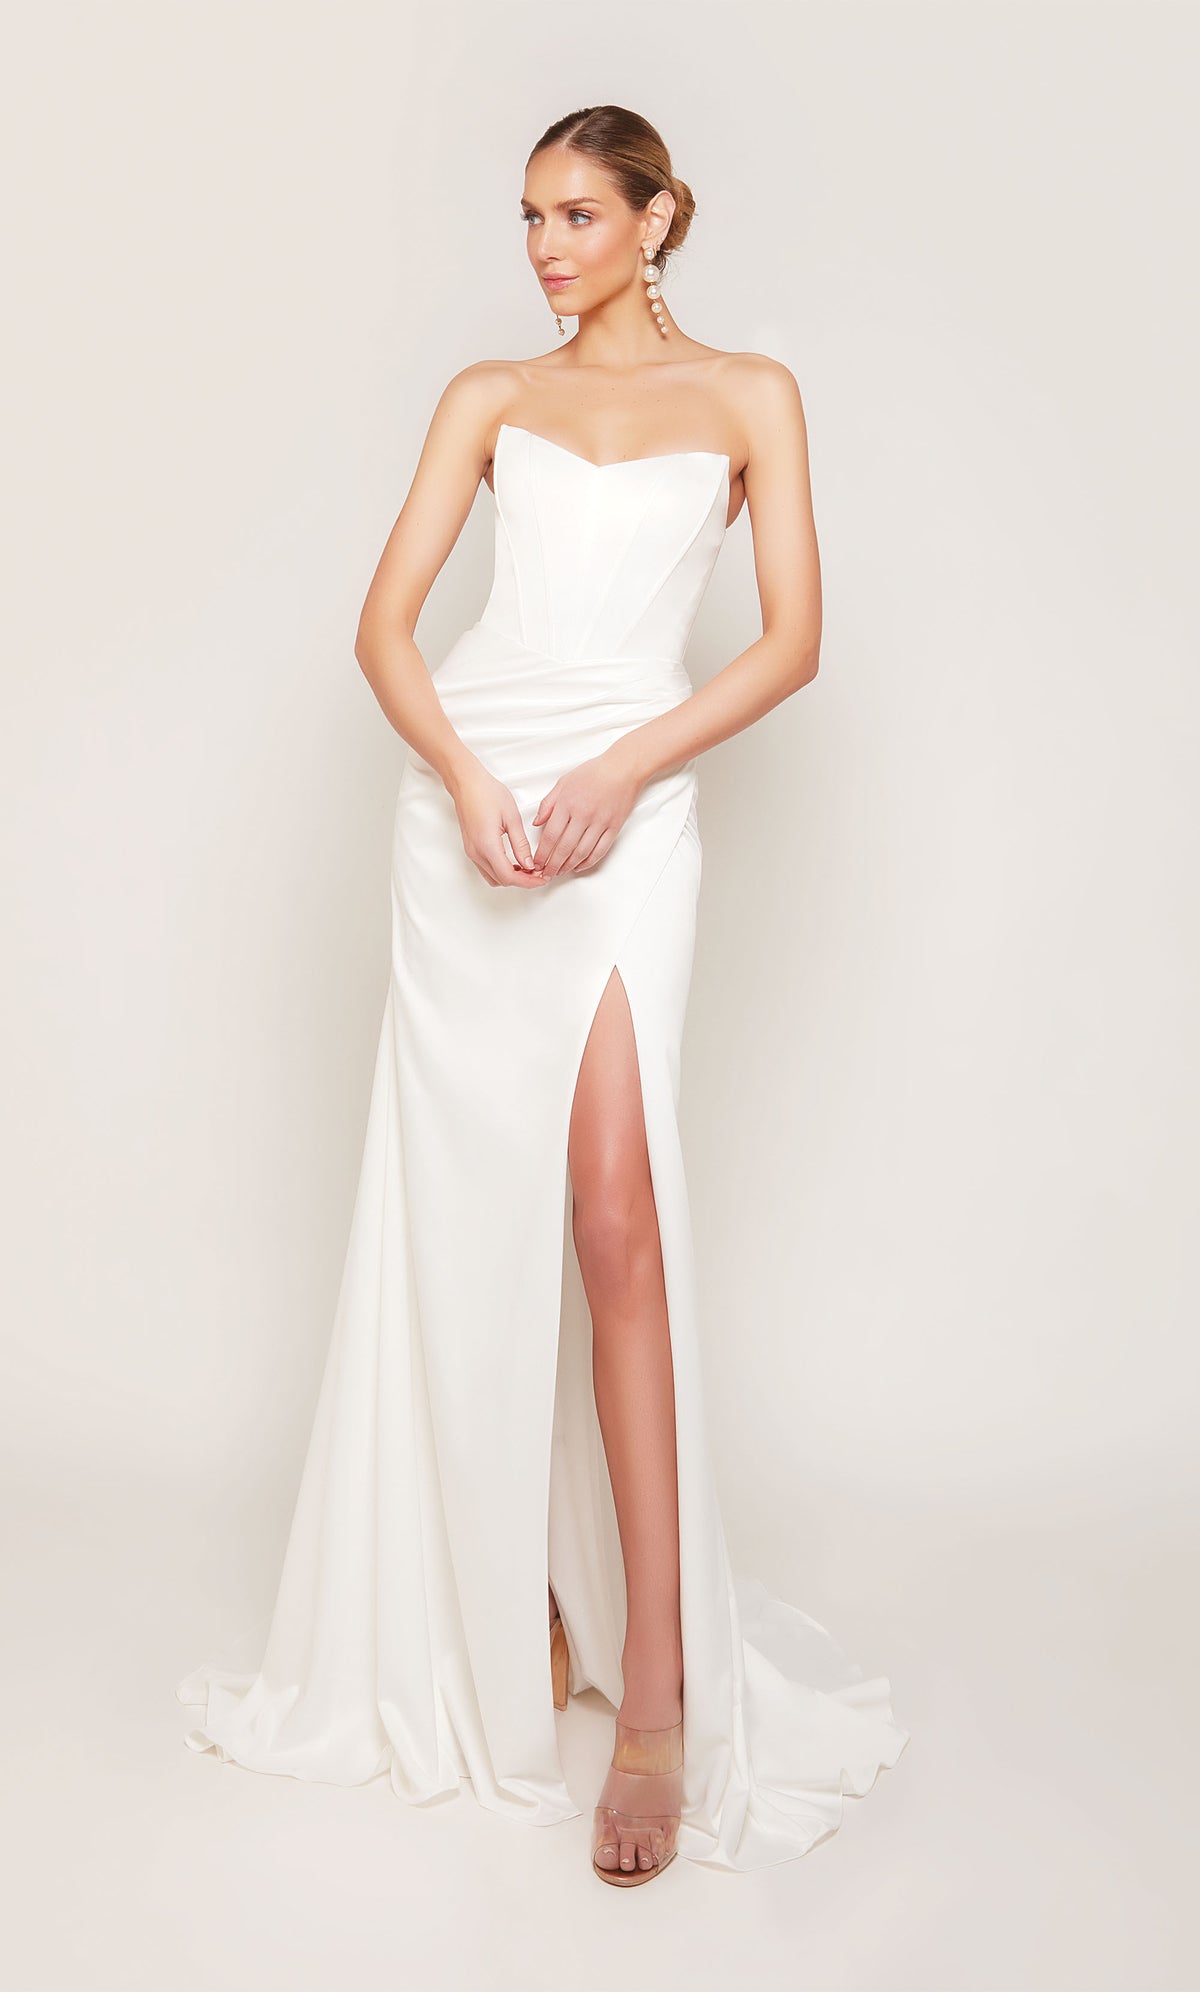 A strapless, corset wedding dress with a ruched waist, an elegant side slit, and detachable side train for a dramatic effect.